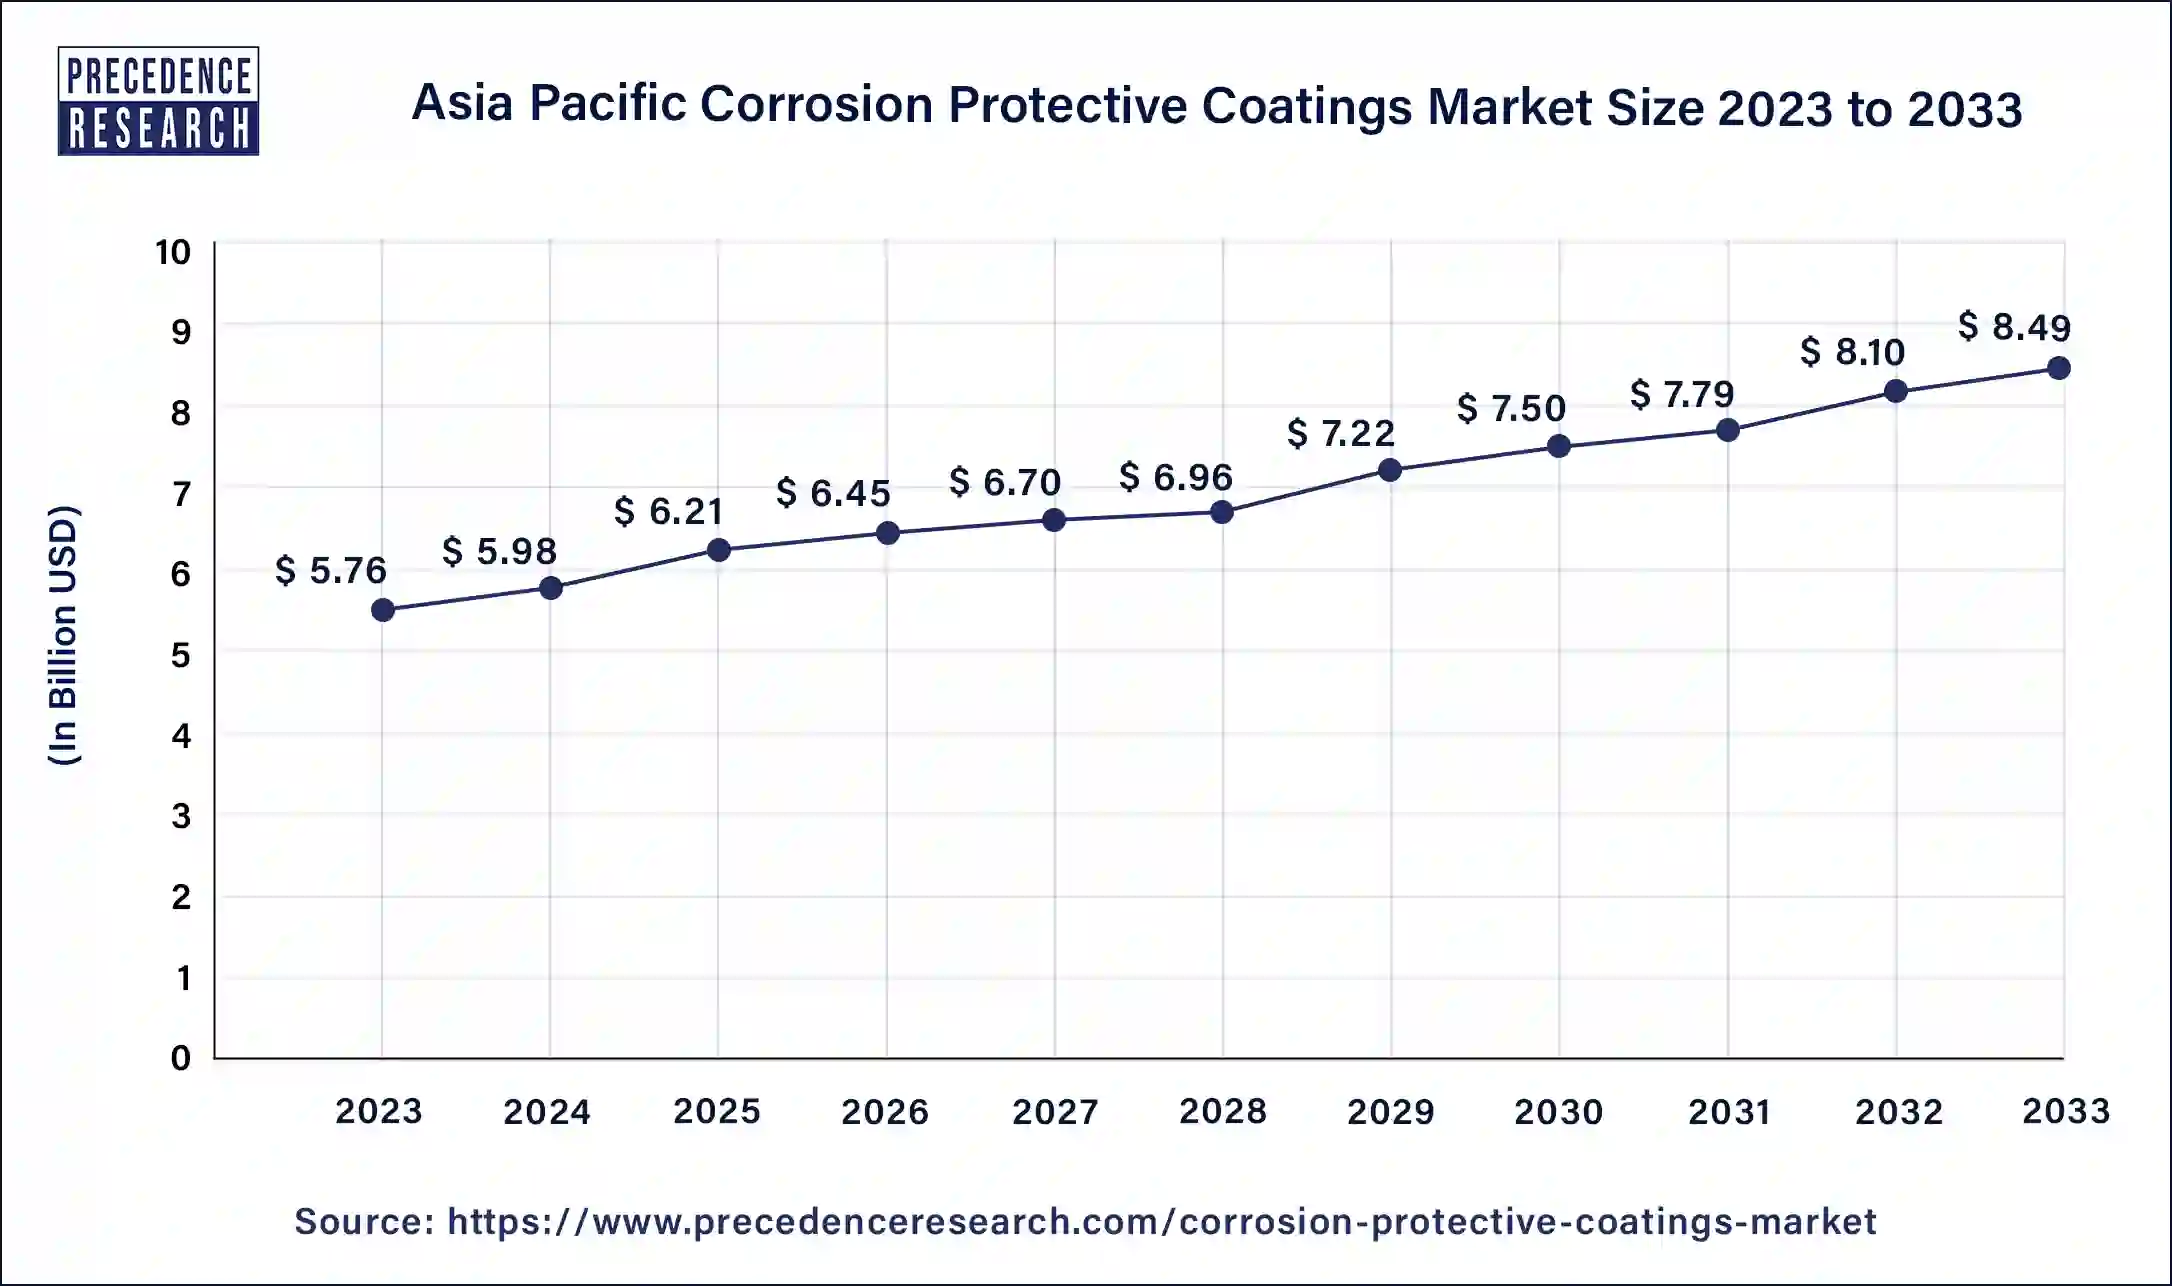  Asia Pacific Corrosion Protective Coatings Market Size 2024 to 2033